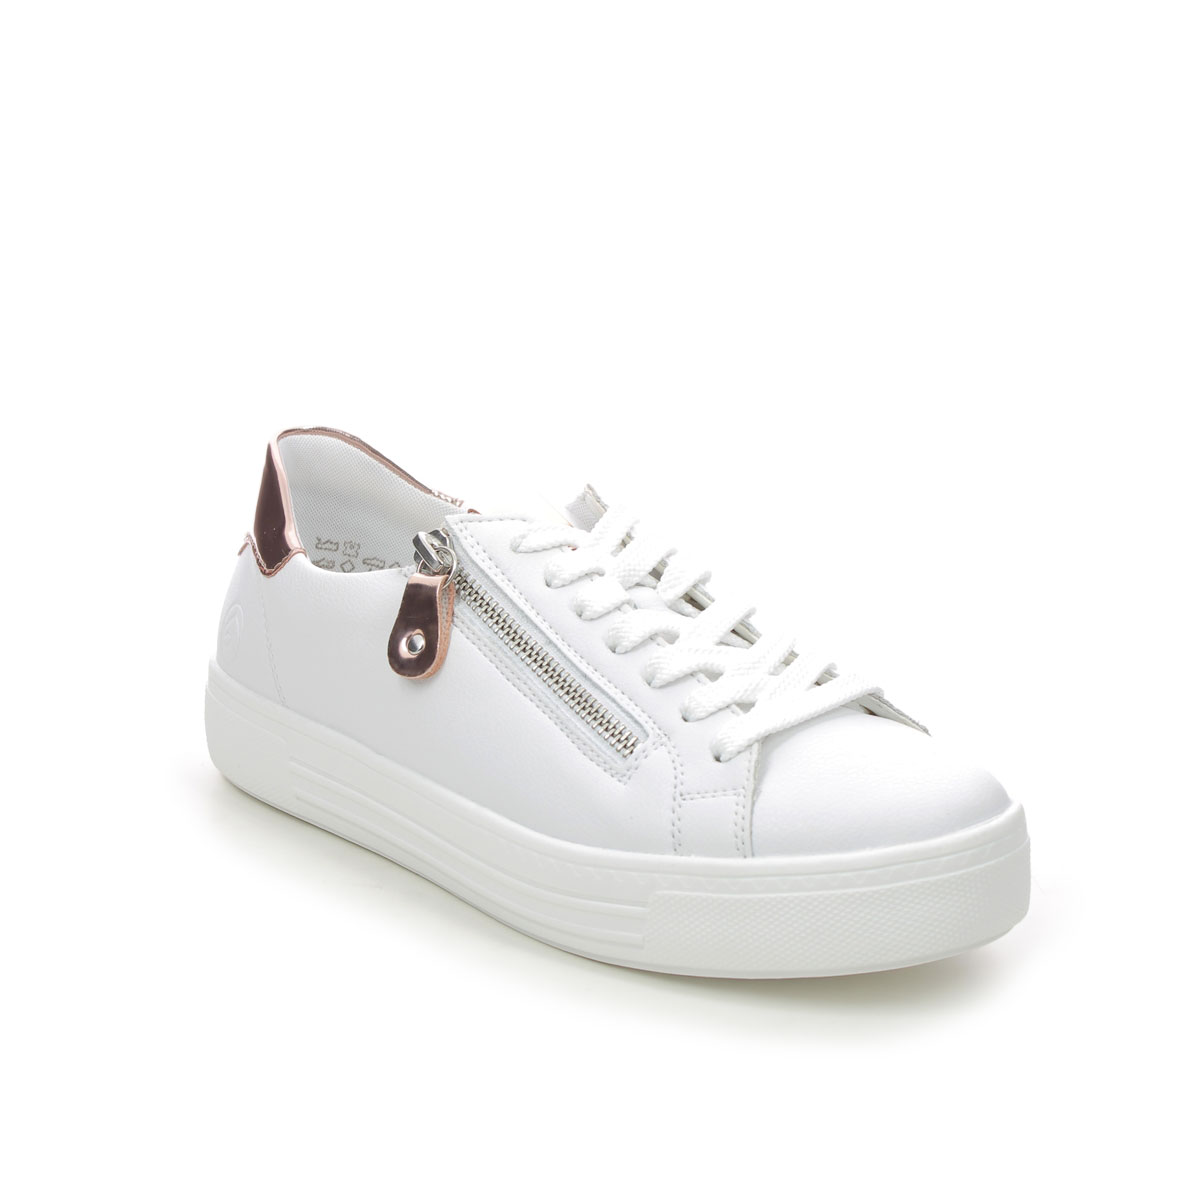 Remonte Altozip White Rose Gold Womens Trainers D0903-81 In Size 42 In Plain White Rose Gold